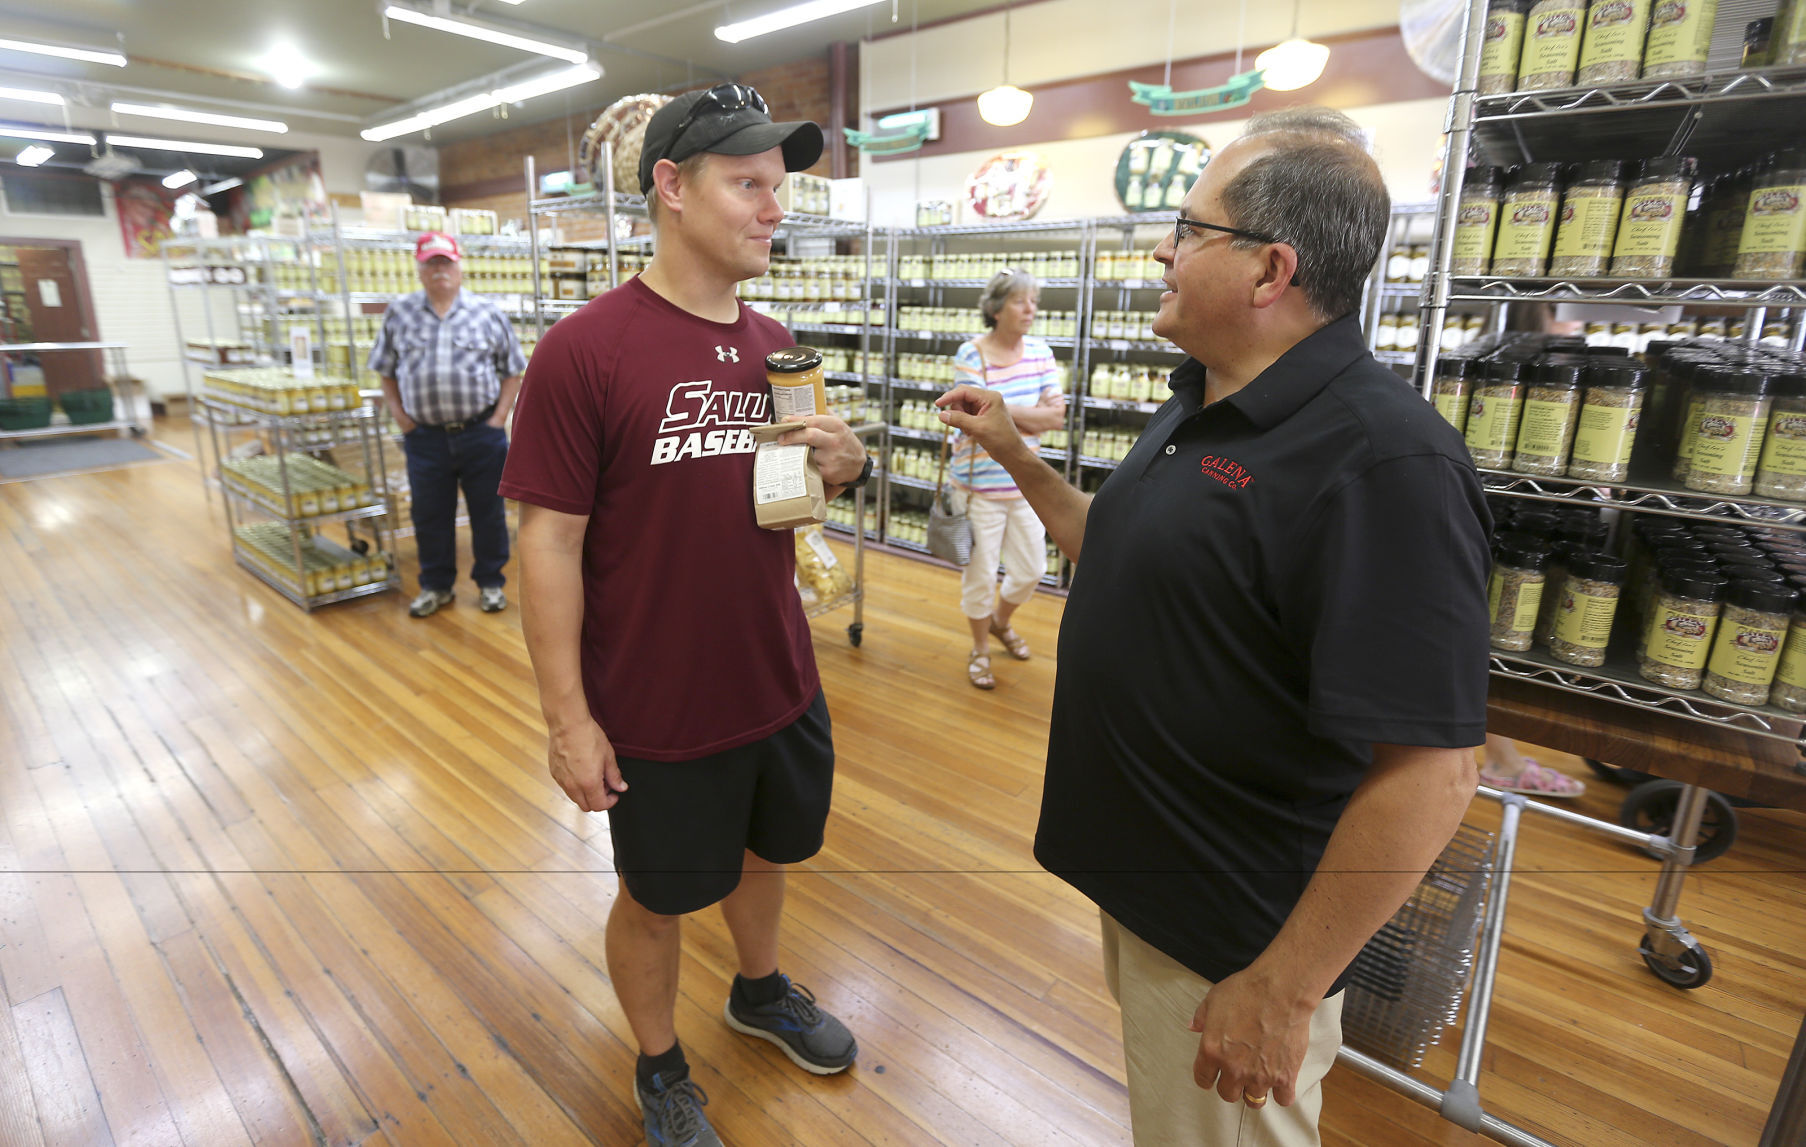 Tim Kelly (left) talks with Jeff Holder, co-owner of the Galena Canning Co., on Thursday, July 21, 2022.    PHOTO CREDIT: Dave Kettering